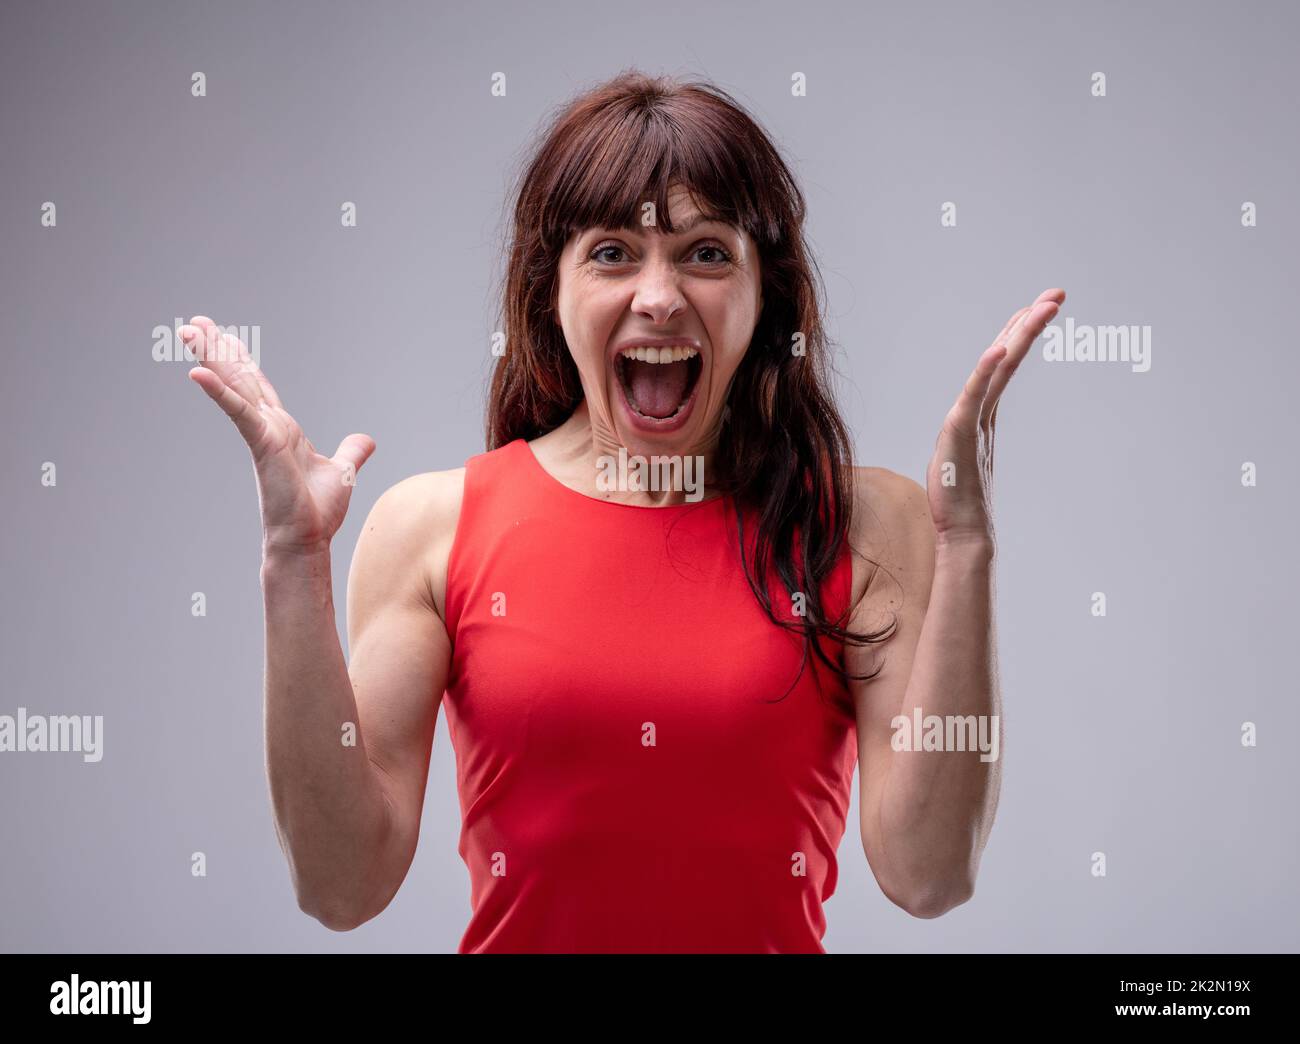 Surprised enthusiastic woman cheering Stock Photo